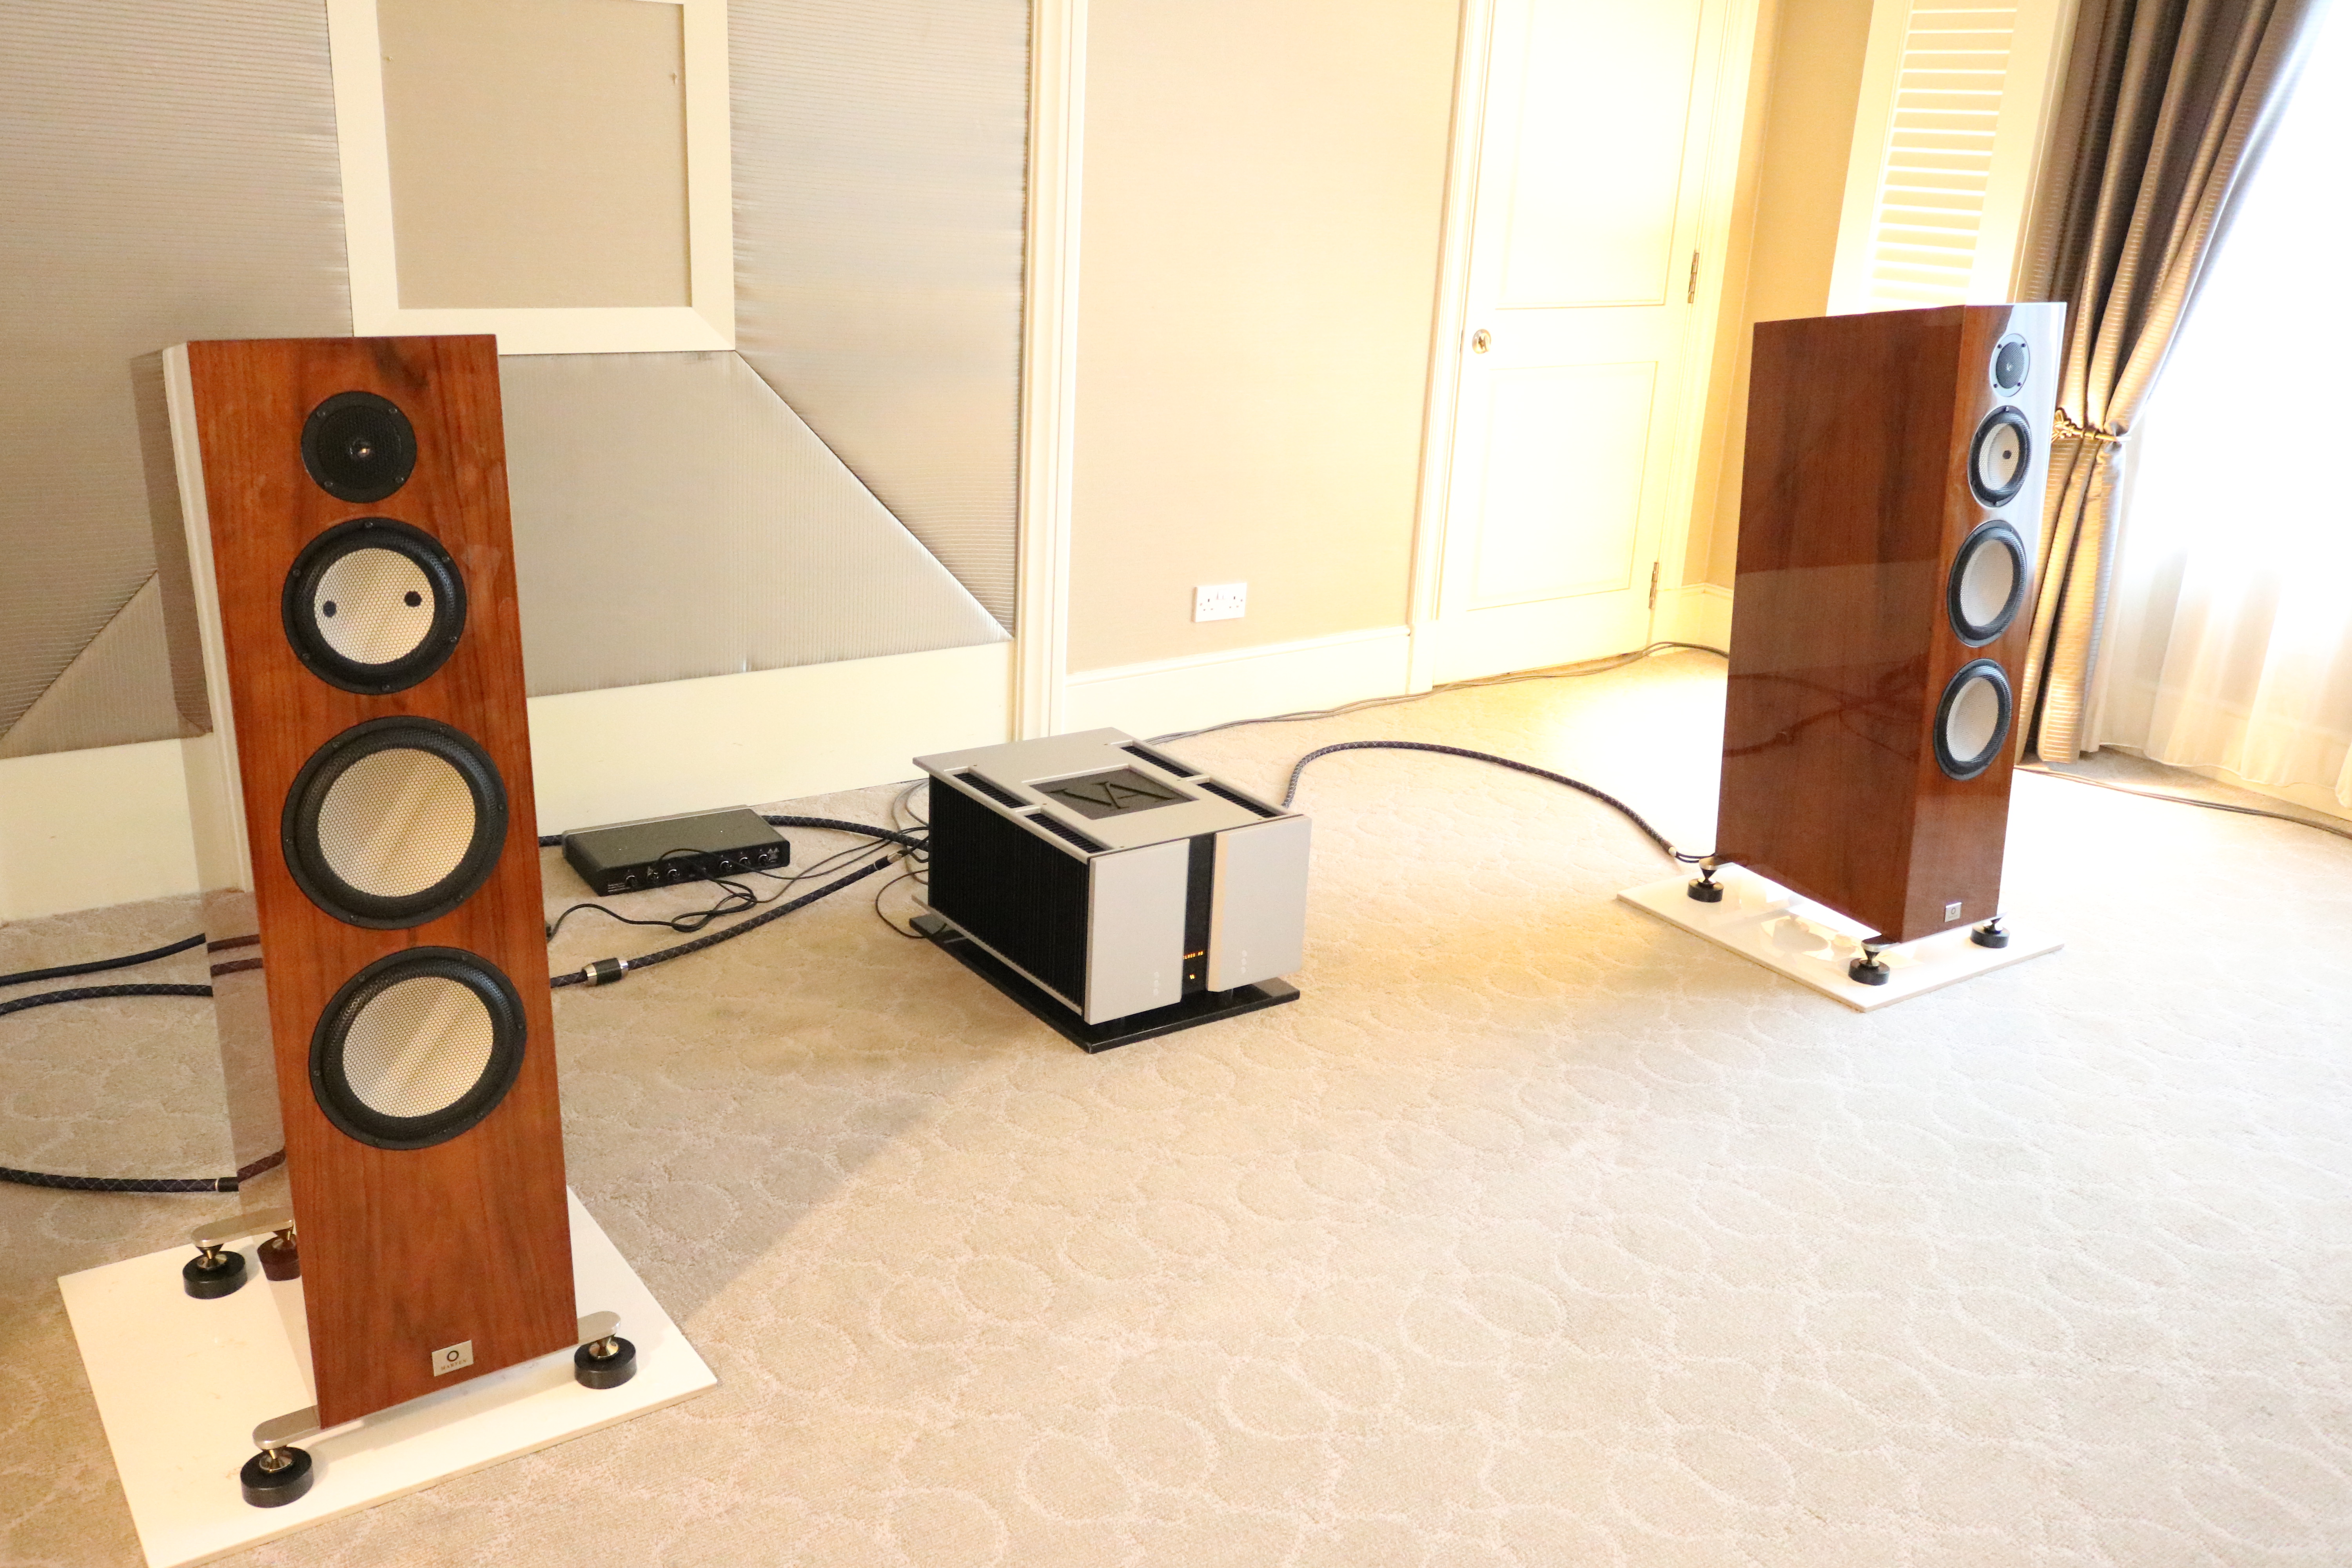 Marten Bird 2 speakers, Vitus pre and power amps, CD transport and DAC and Dohlmann turntable in the Swedisn statement room.